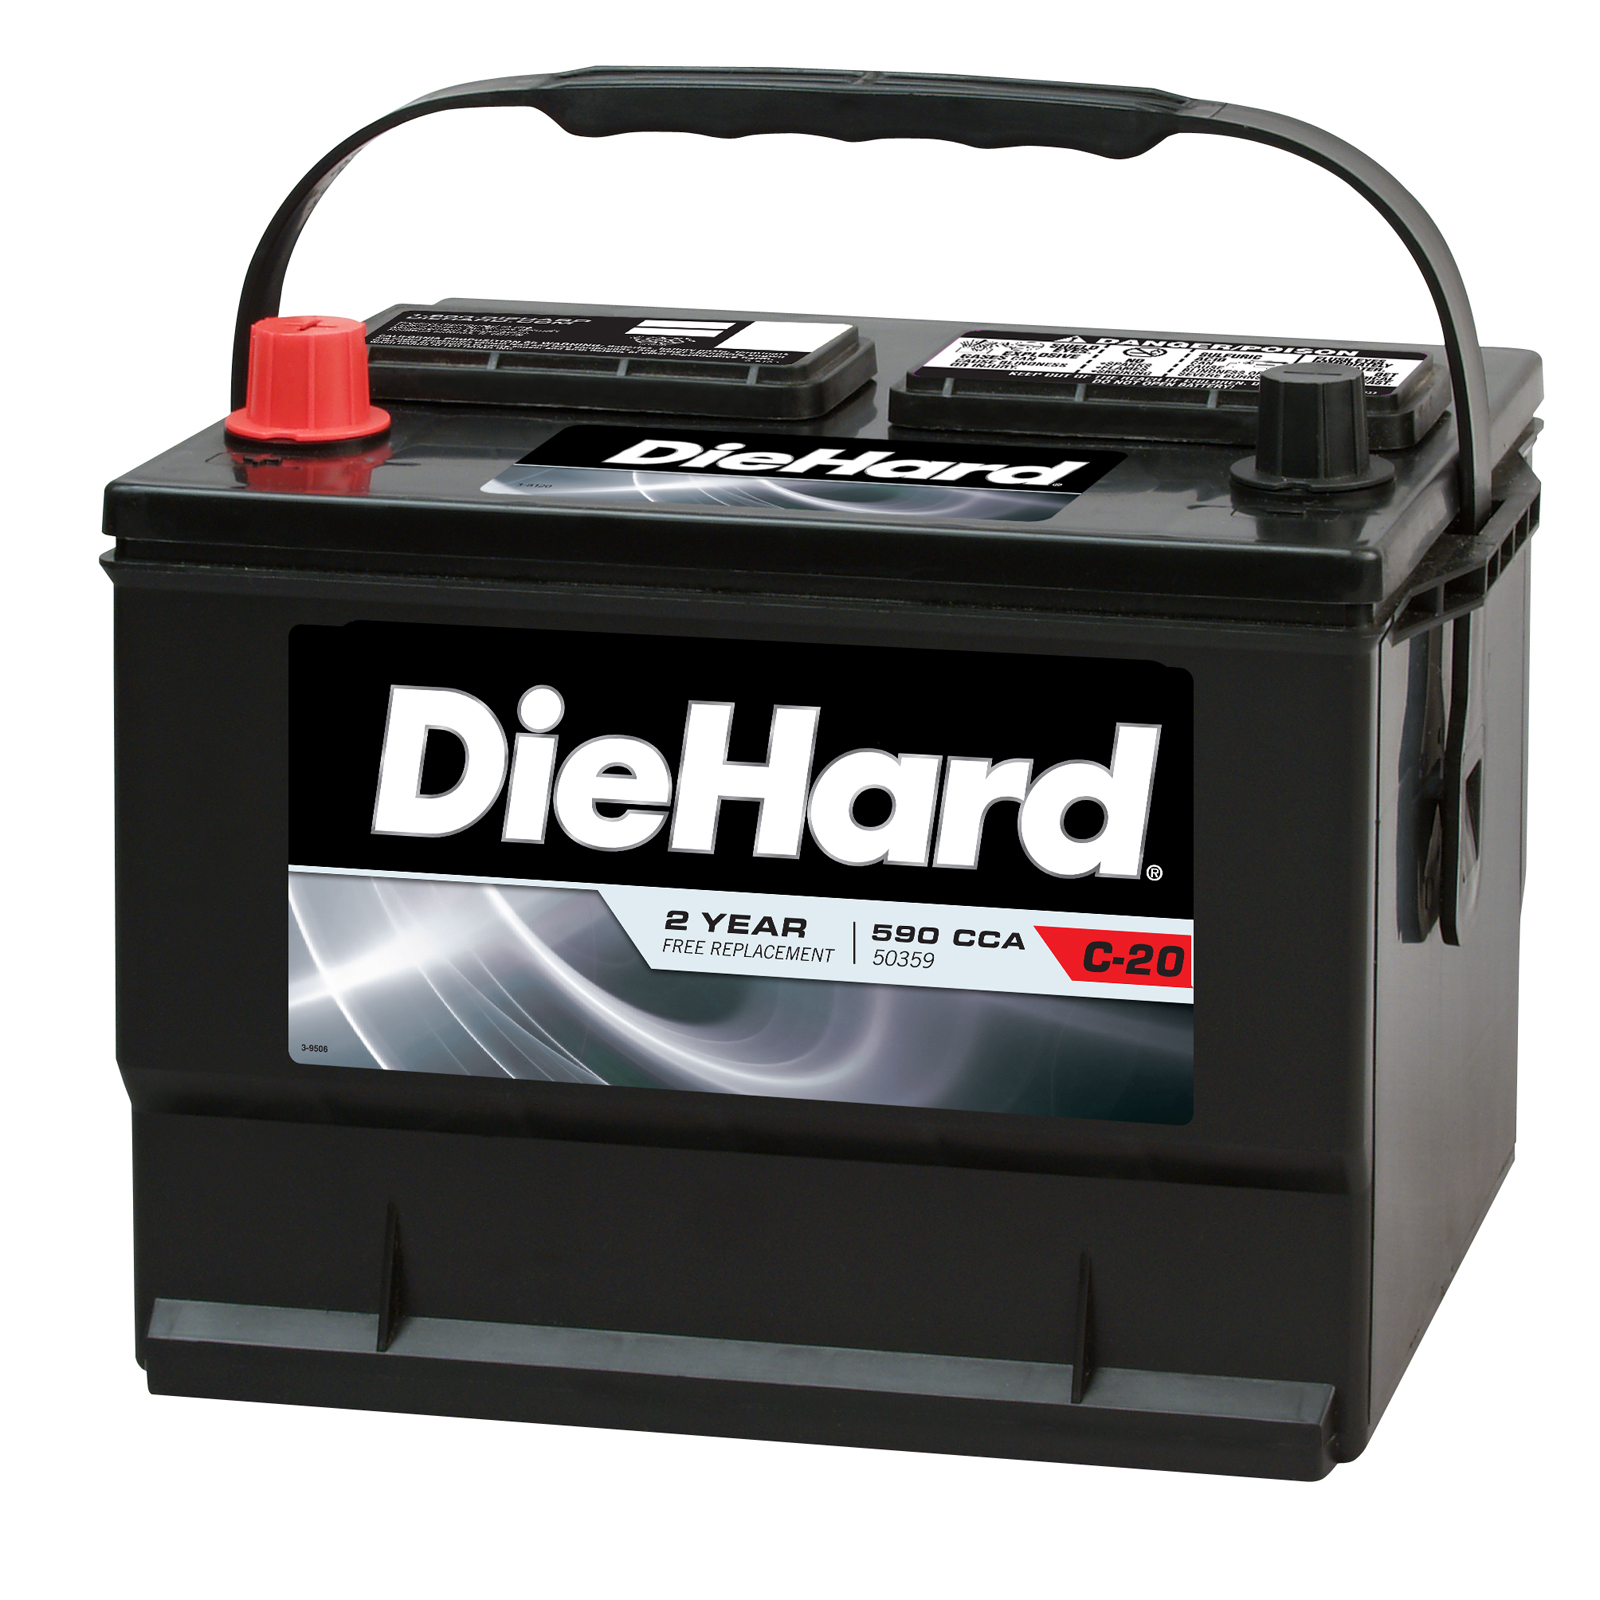 DieHard Automotive Battery - Group Size EP-59 (Price with Exchange)